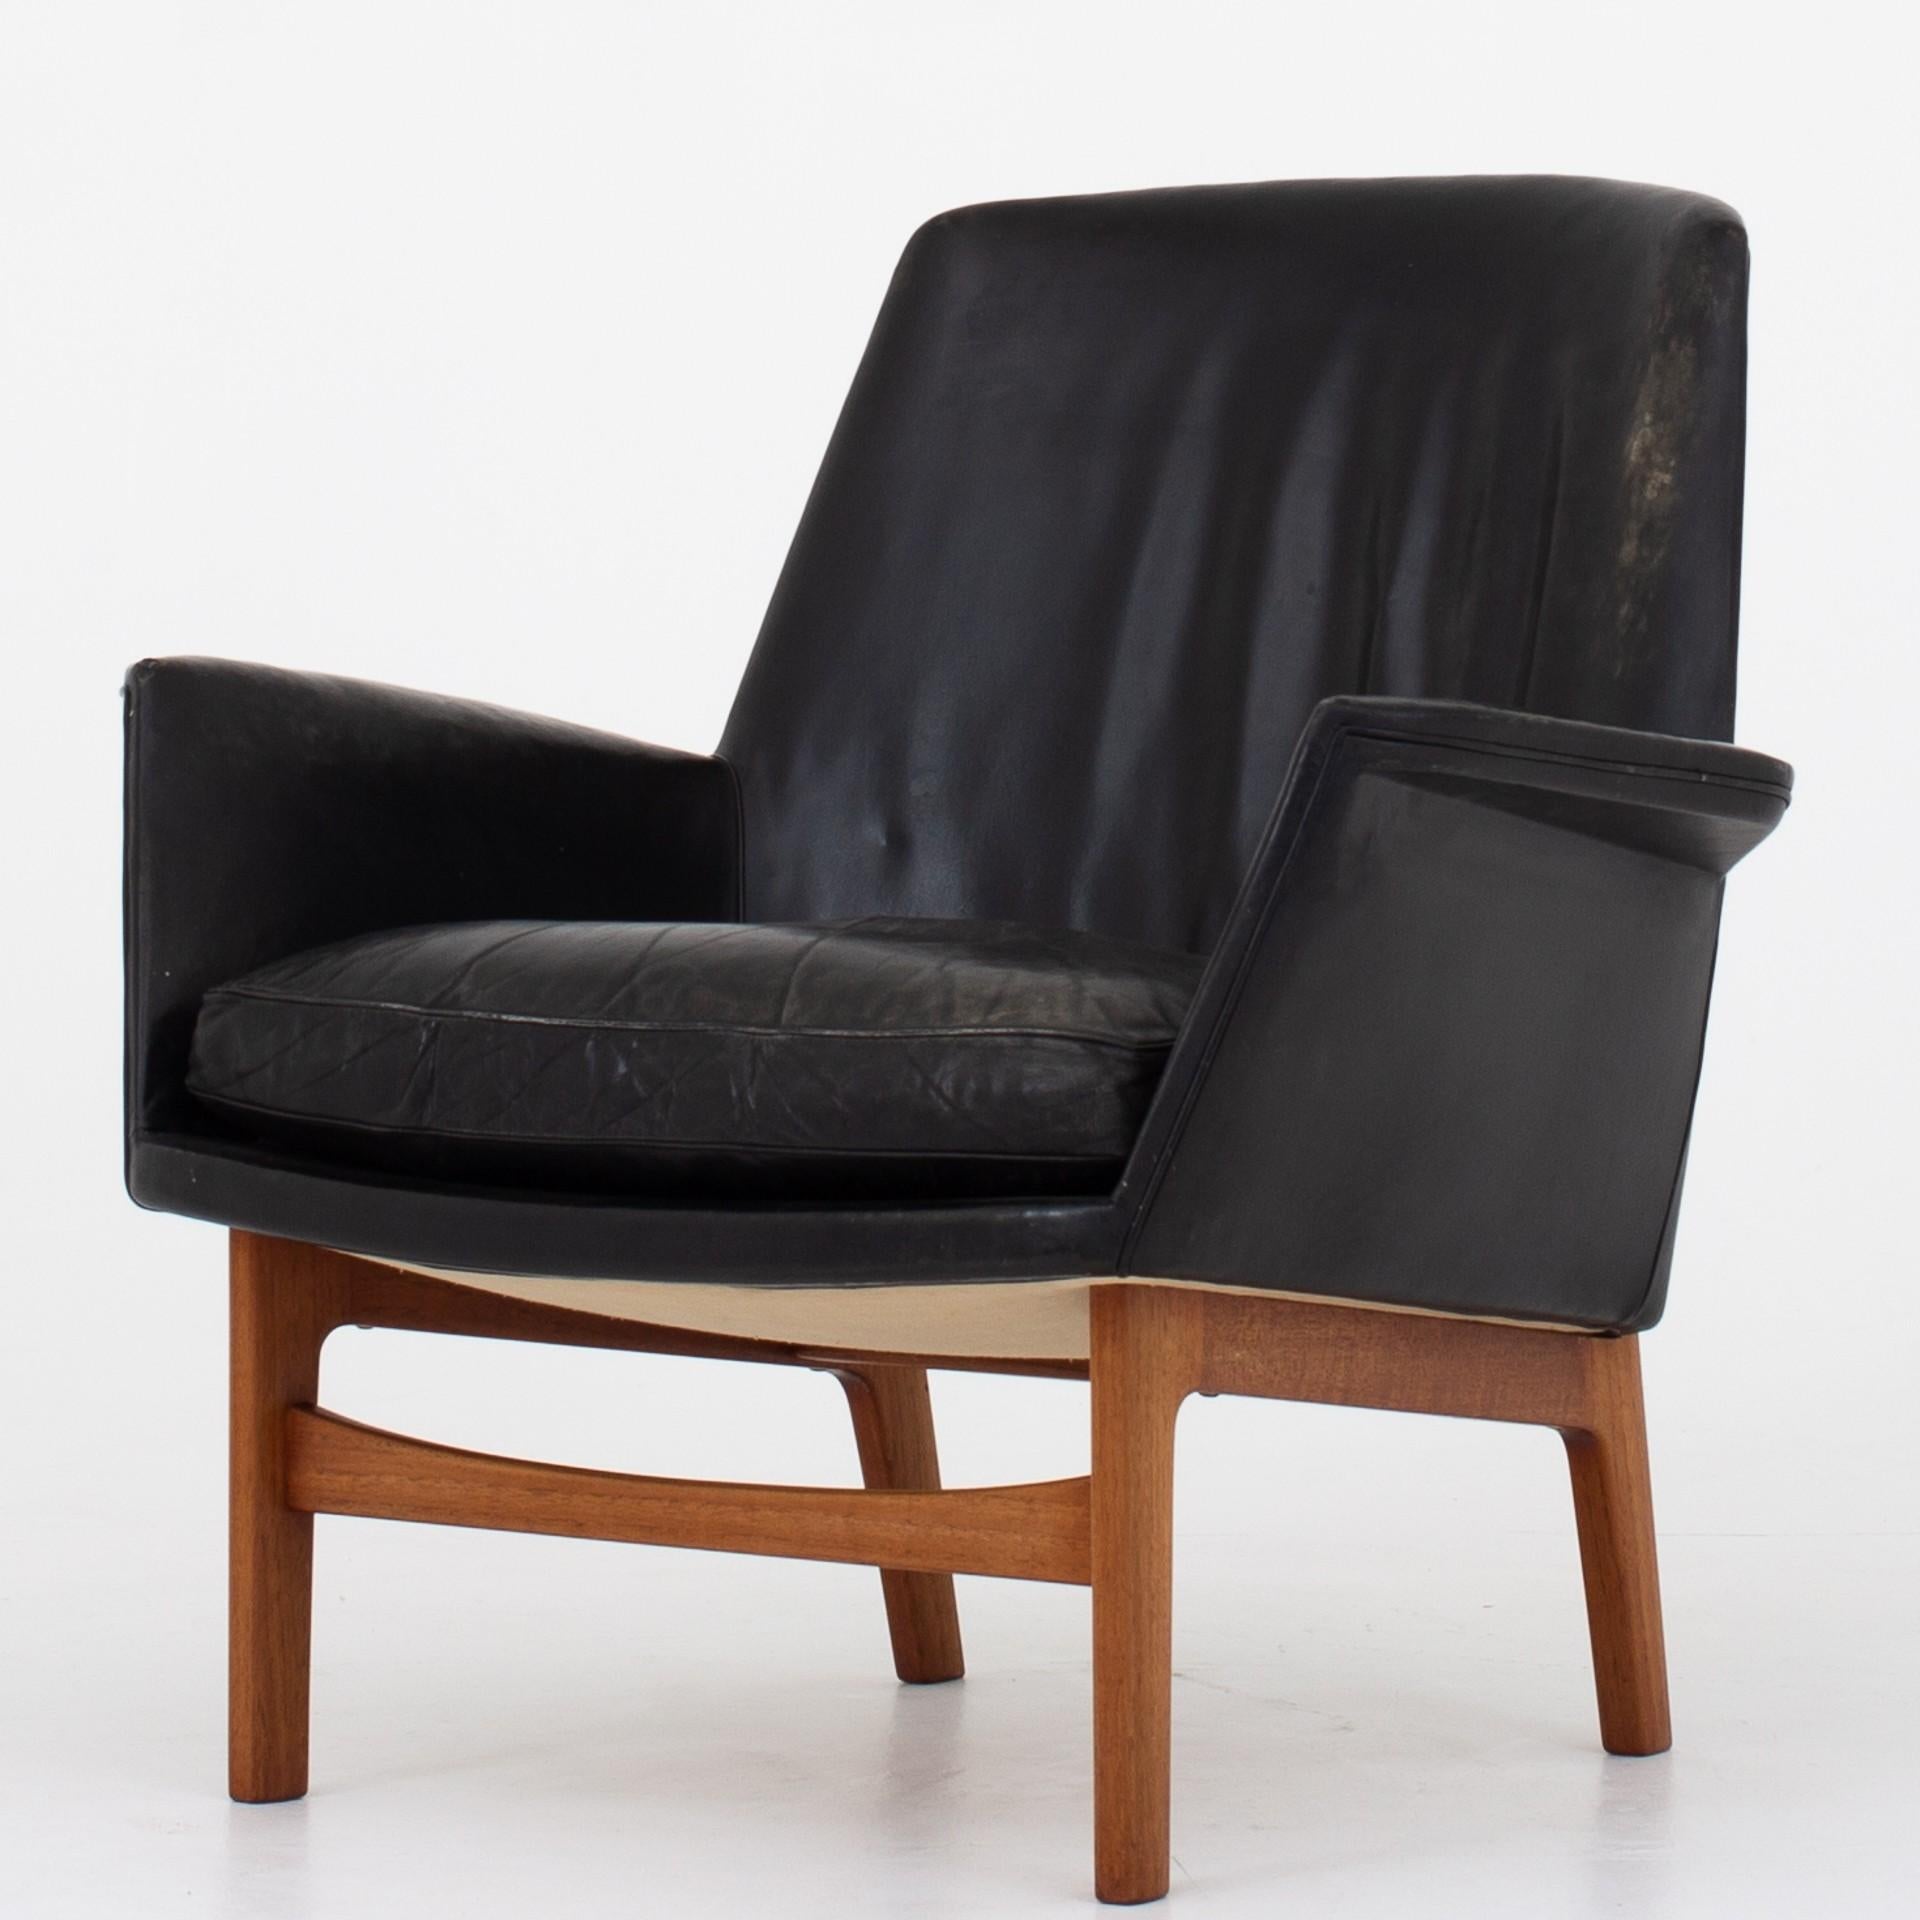 Set consisting of two easy chairs and ottoman in patinated black leather and teak frames. Rare set. Maker Thorald Madsen, 1950.